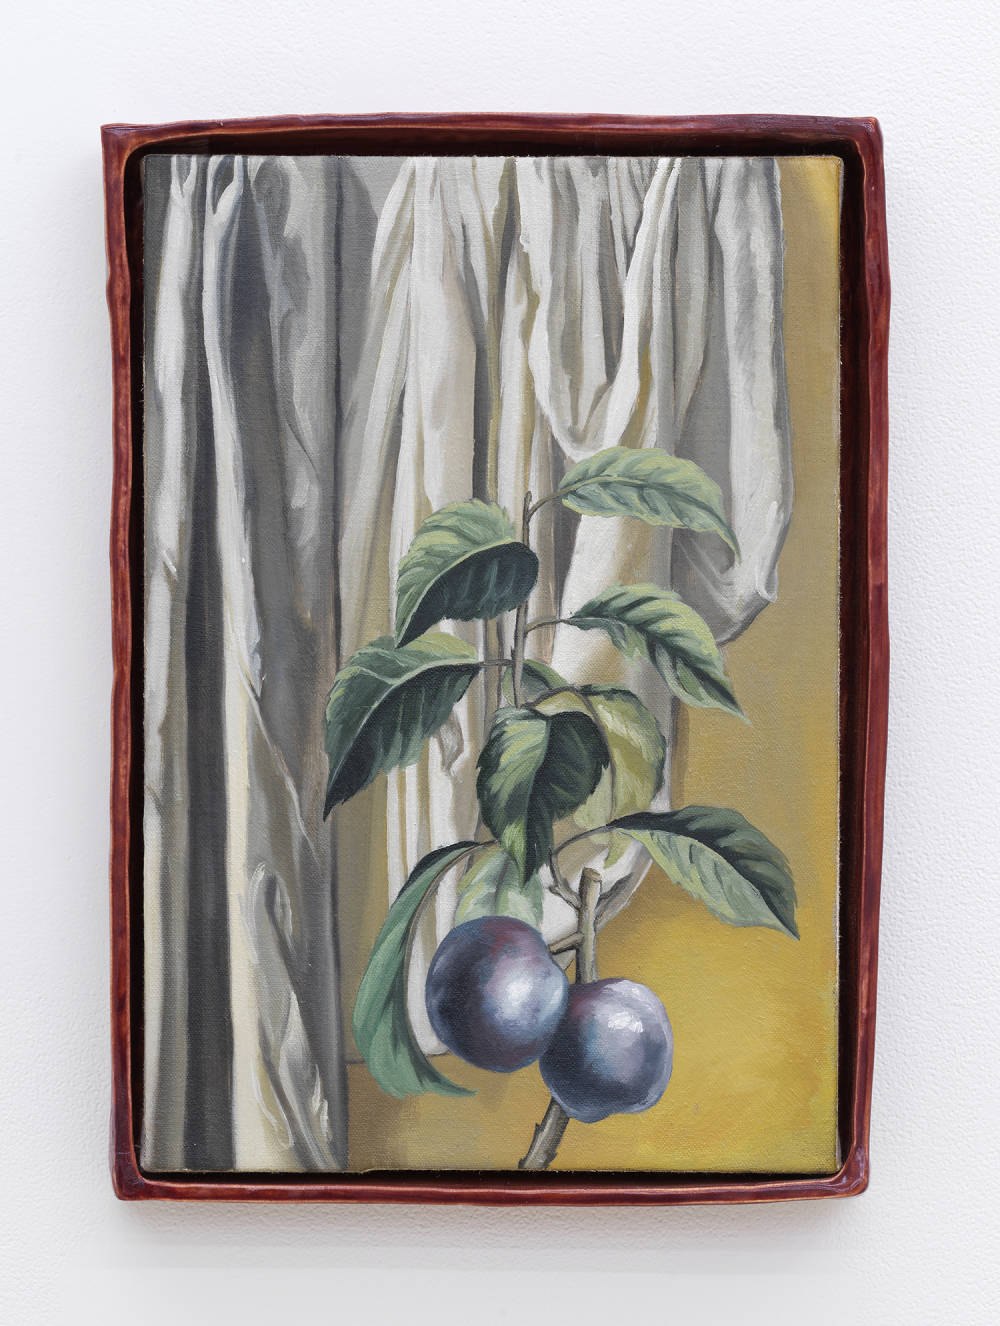 A small painting depicting a bushel of blueberries with an abstracted curtain behind it. The painting is housed within an irregularly shaped reddish frame. 